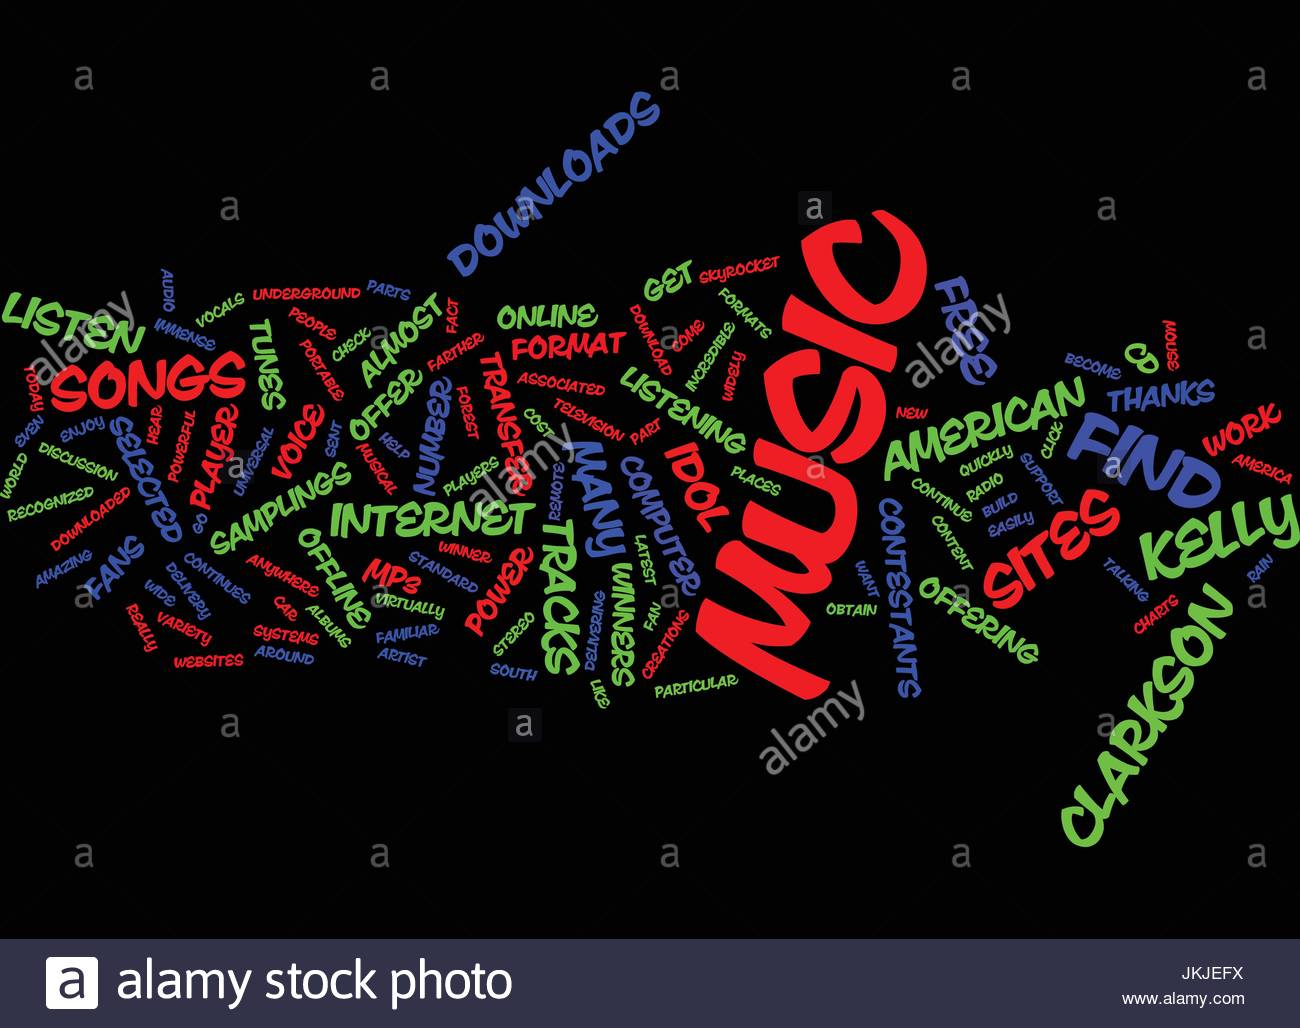 Music S For Kelly Clarkson Text Background Word Cloud